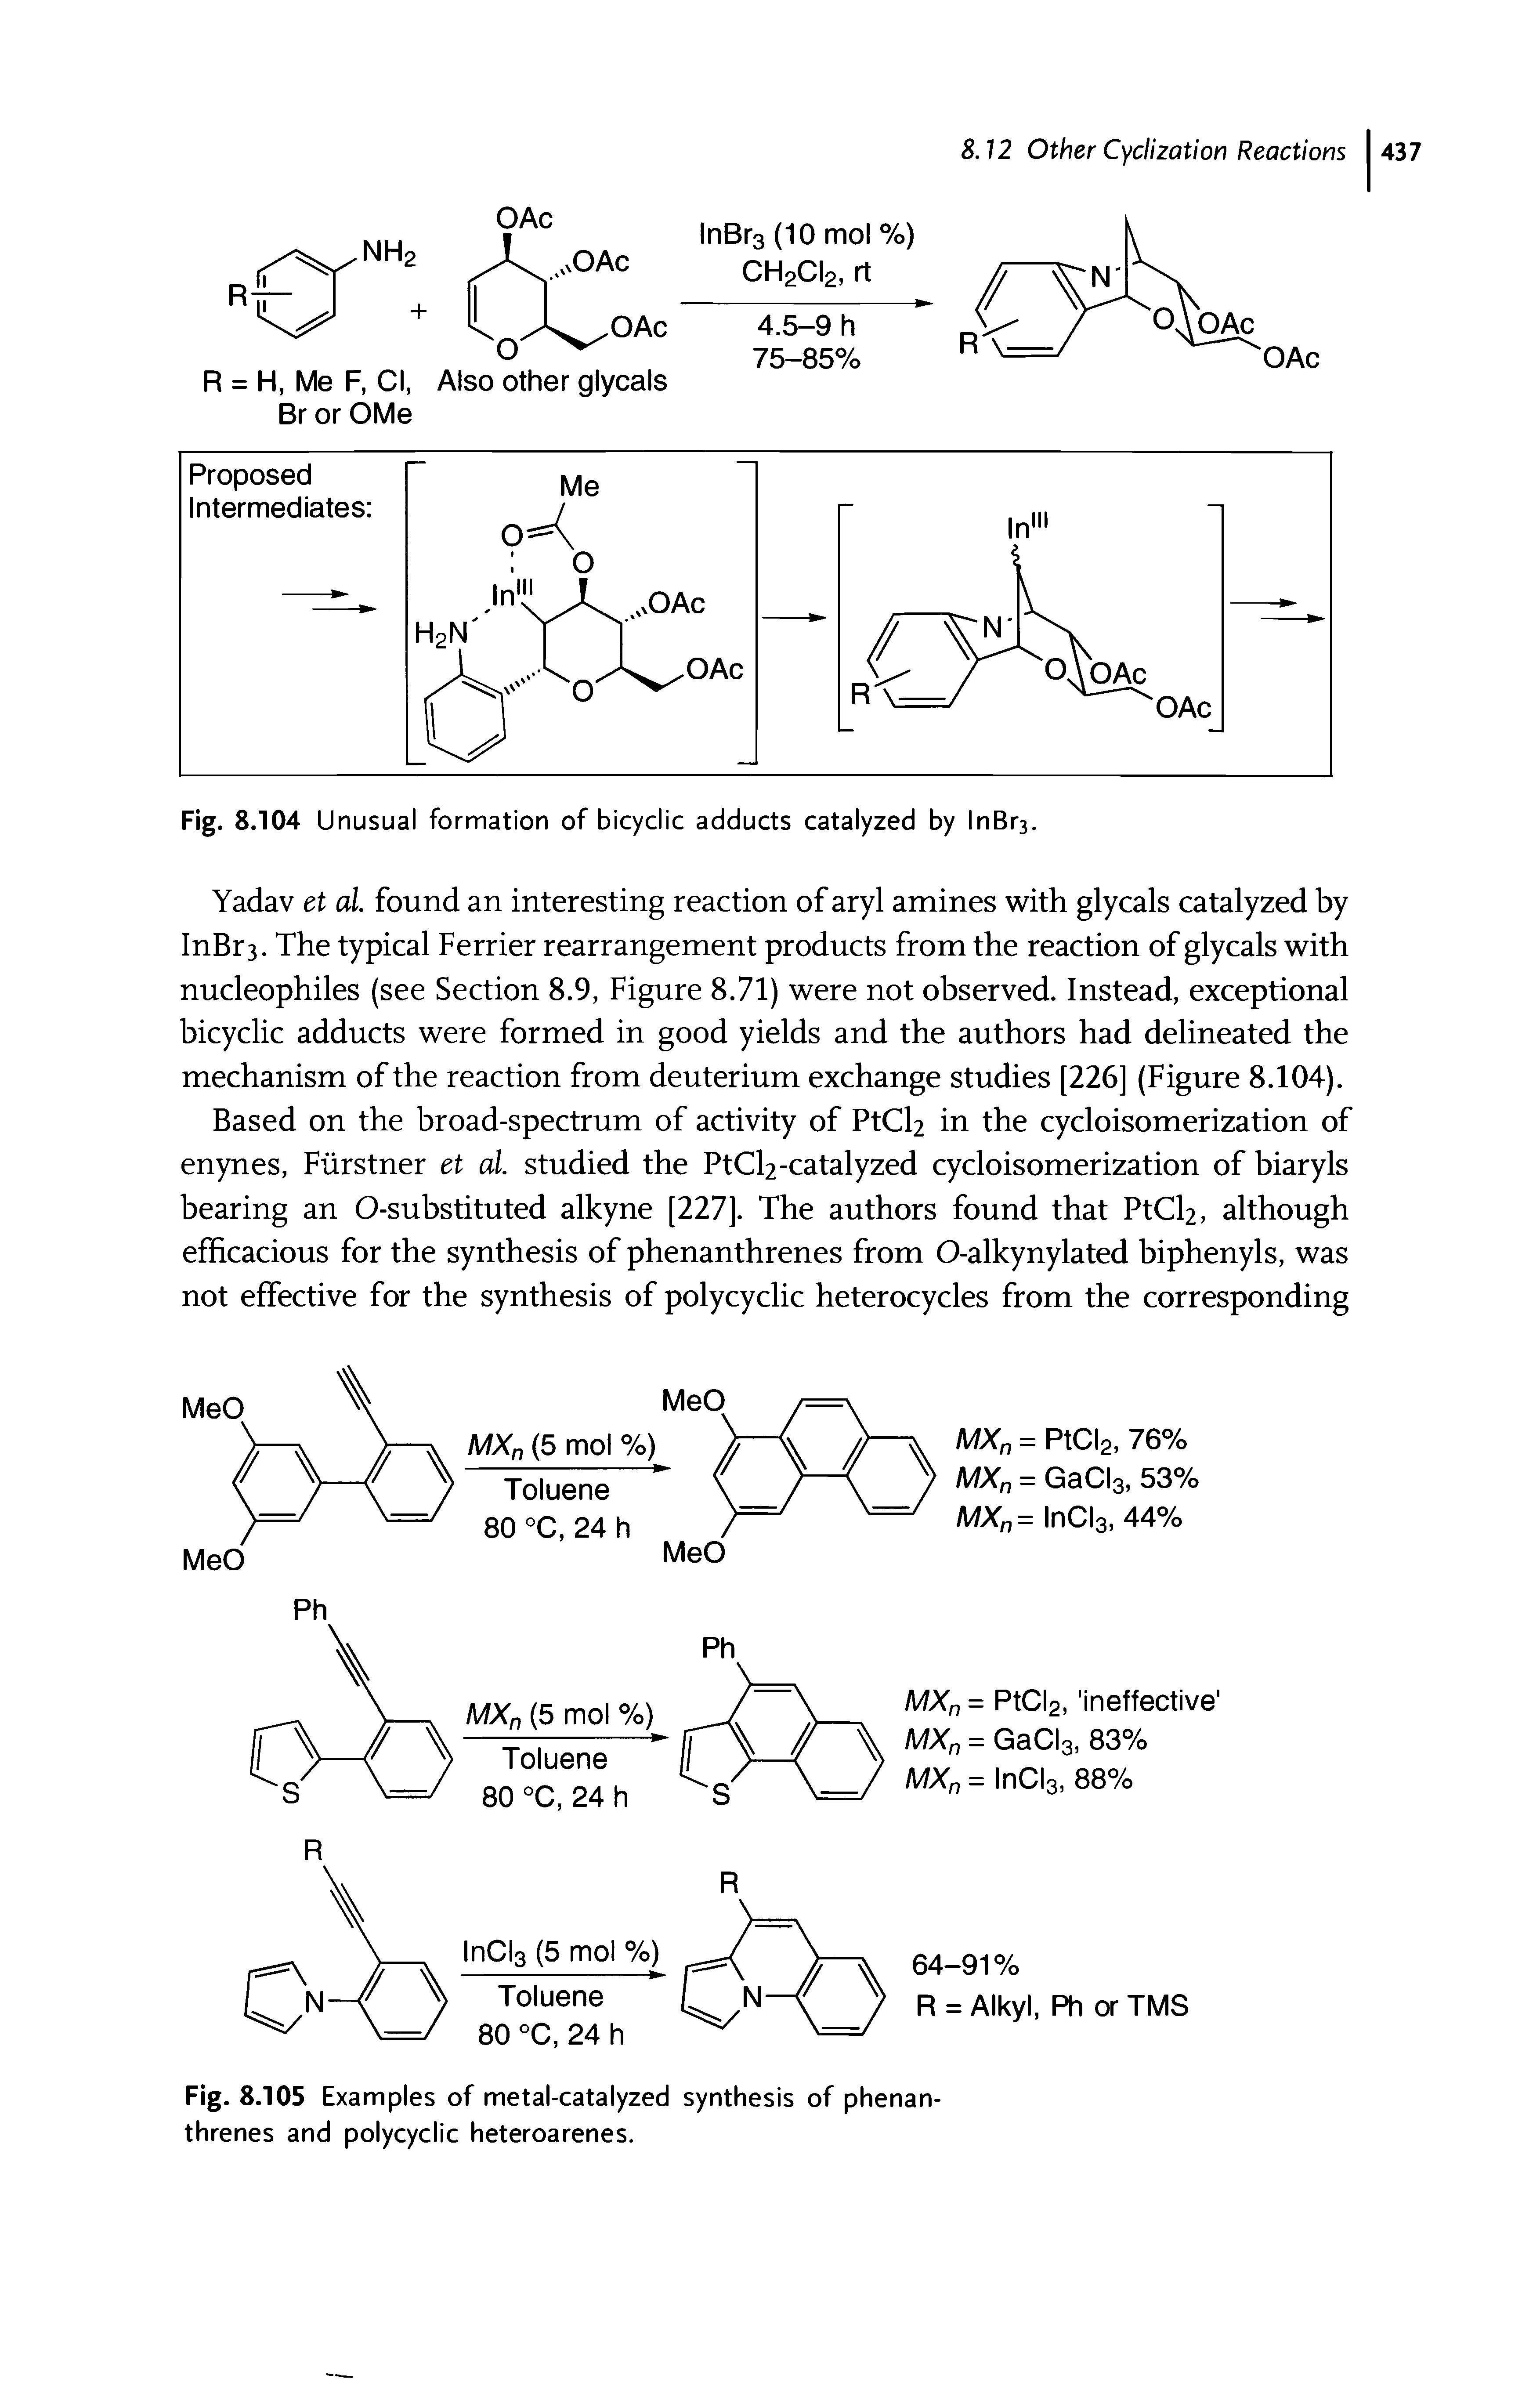 Fig. 8.105 Examples of metal-catalyzed synthesis of phenanthrenes and polycyclic heteroarenes.